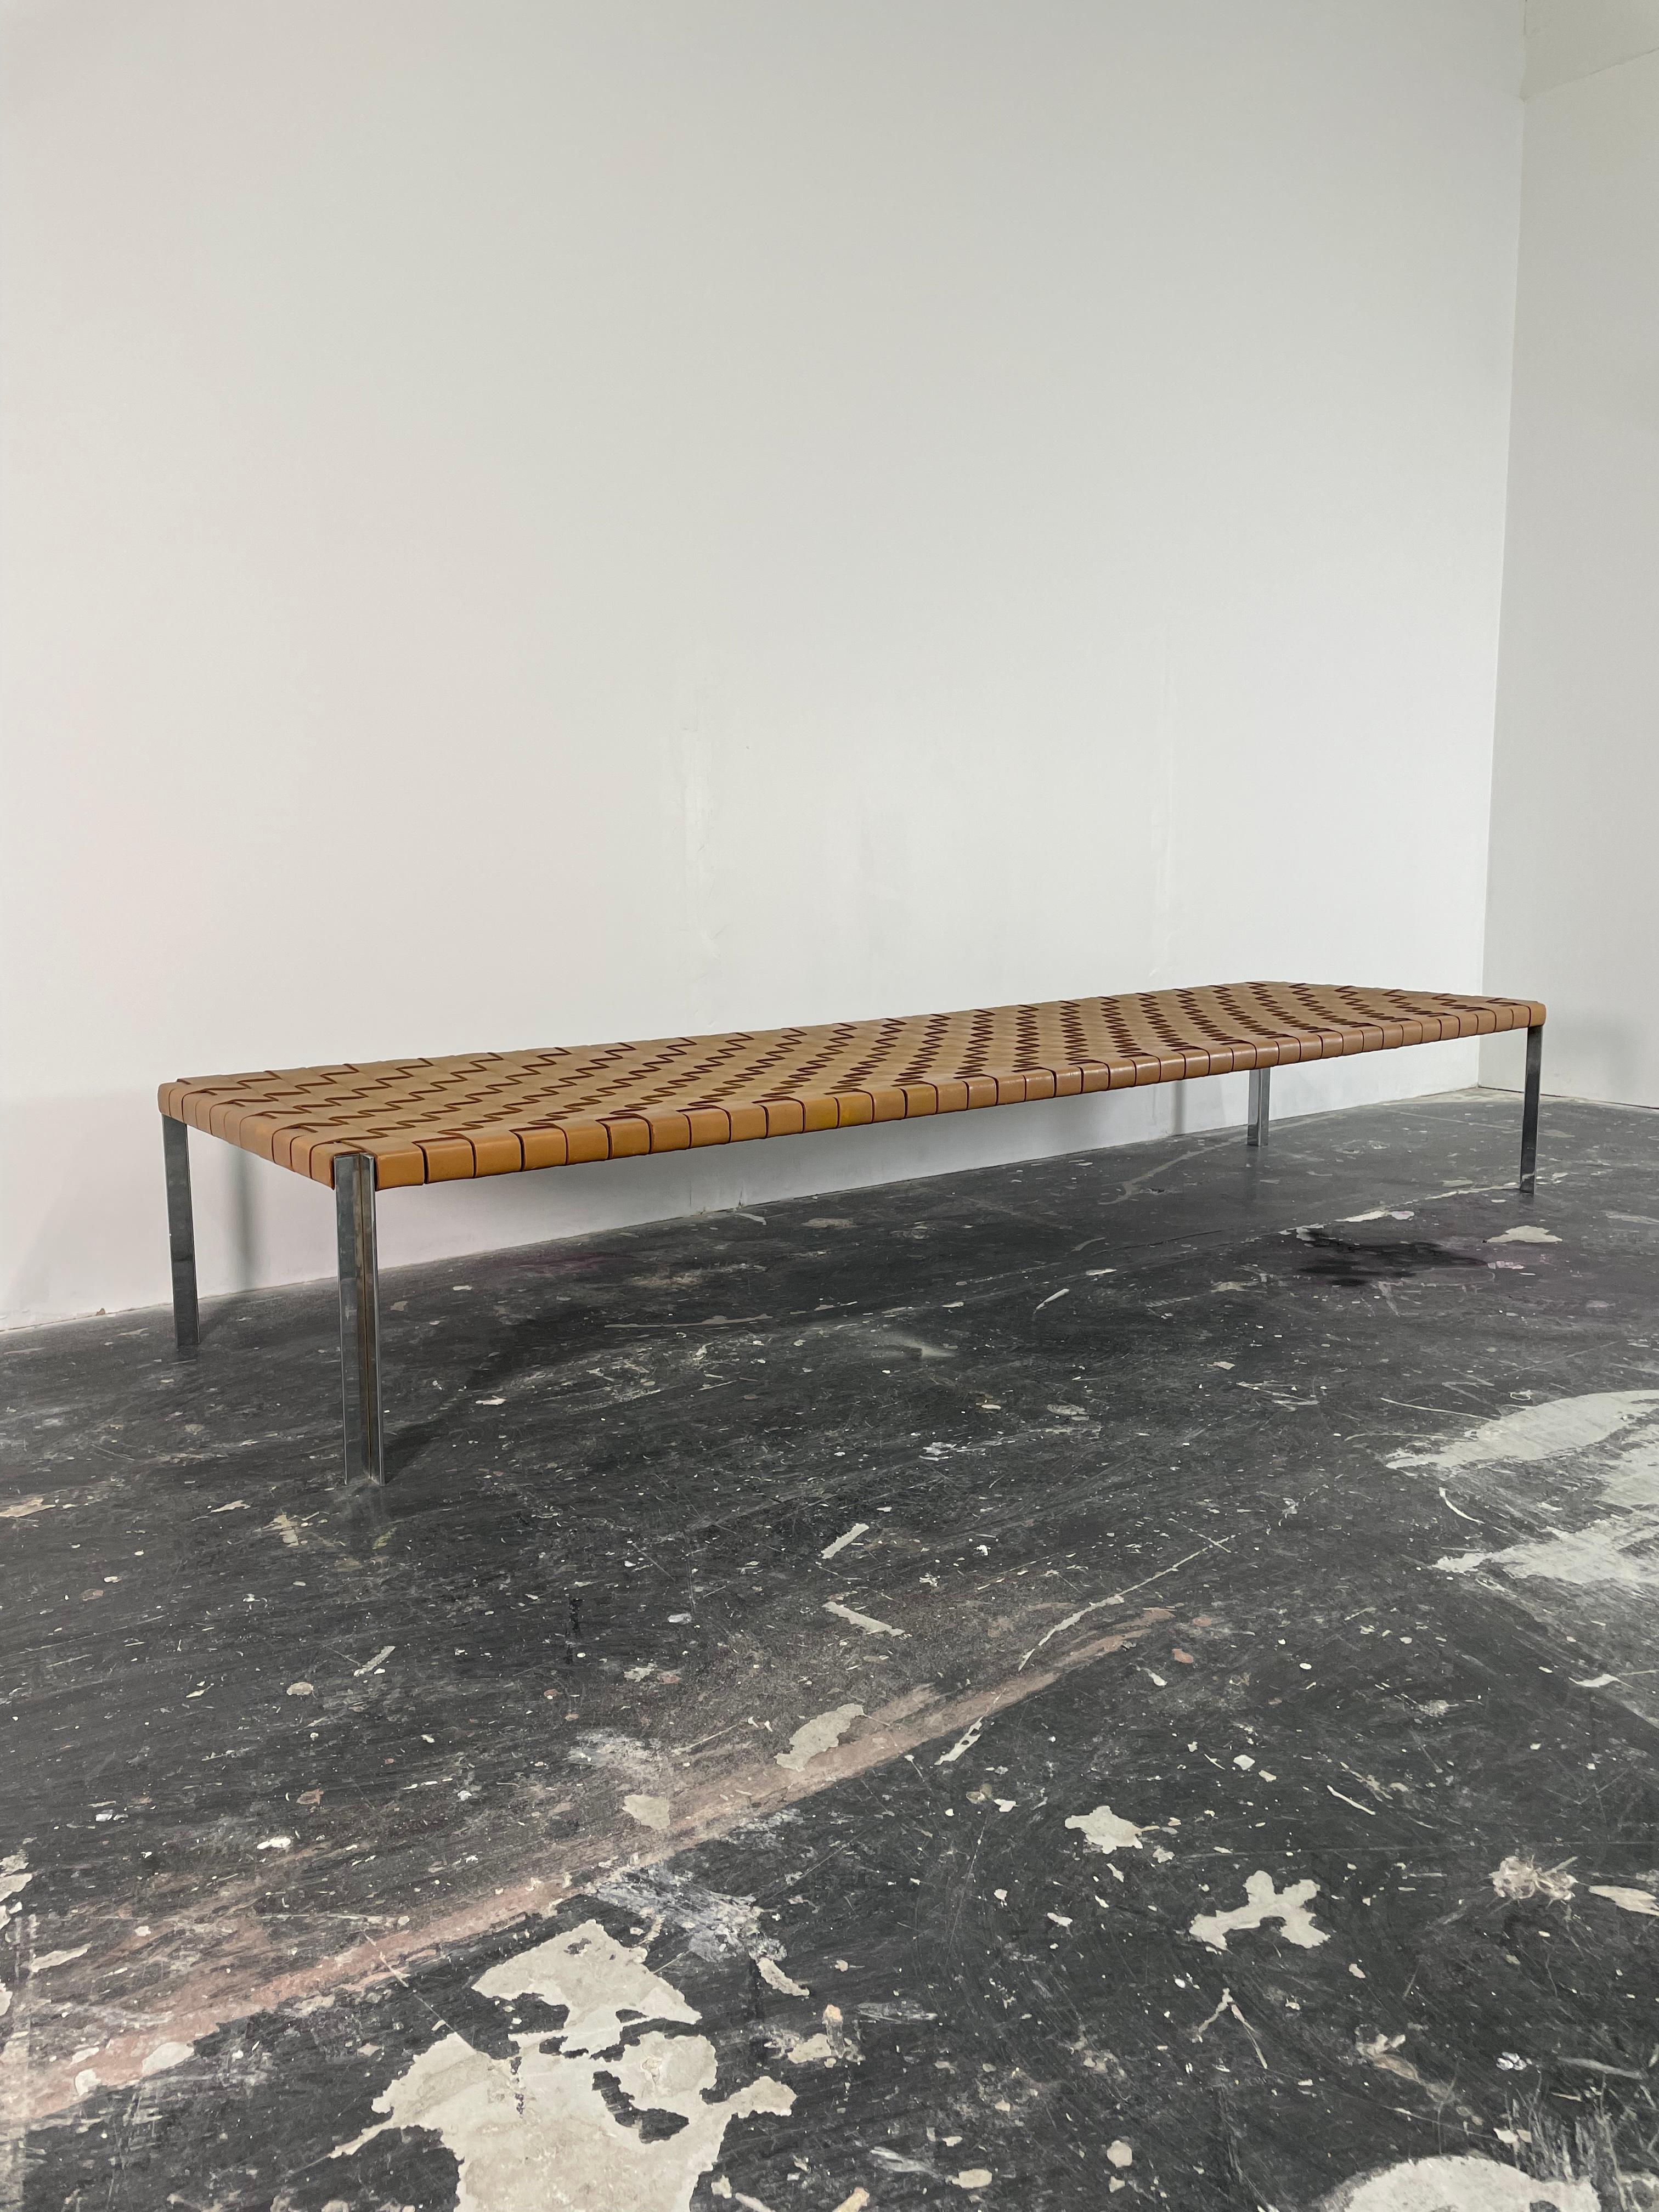 Large Woven Leather and Steel Bench by Erwine & Estelle Laverne